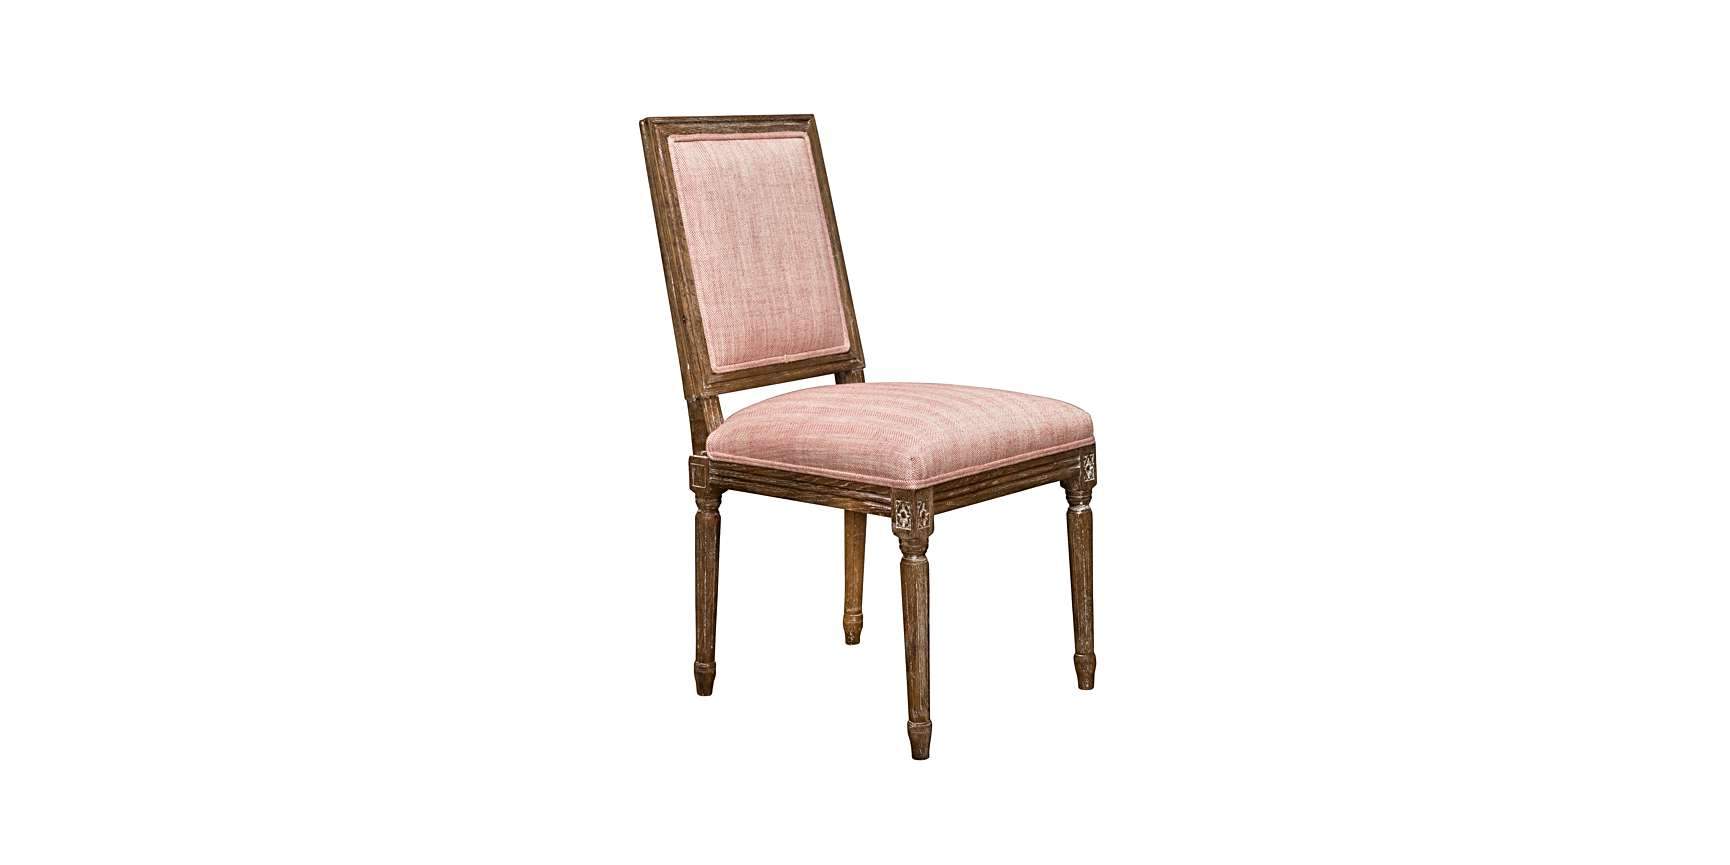 6 x Elegant French Inspired India Jane Le Manoir Dining Chairs